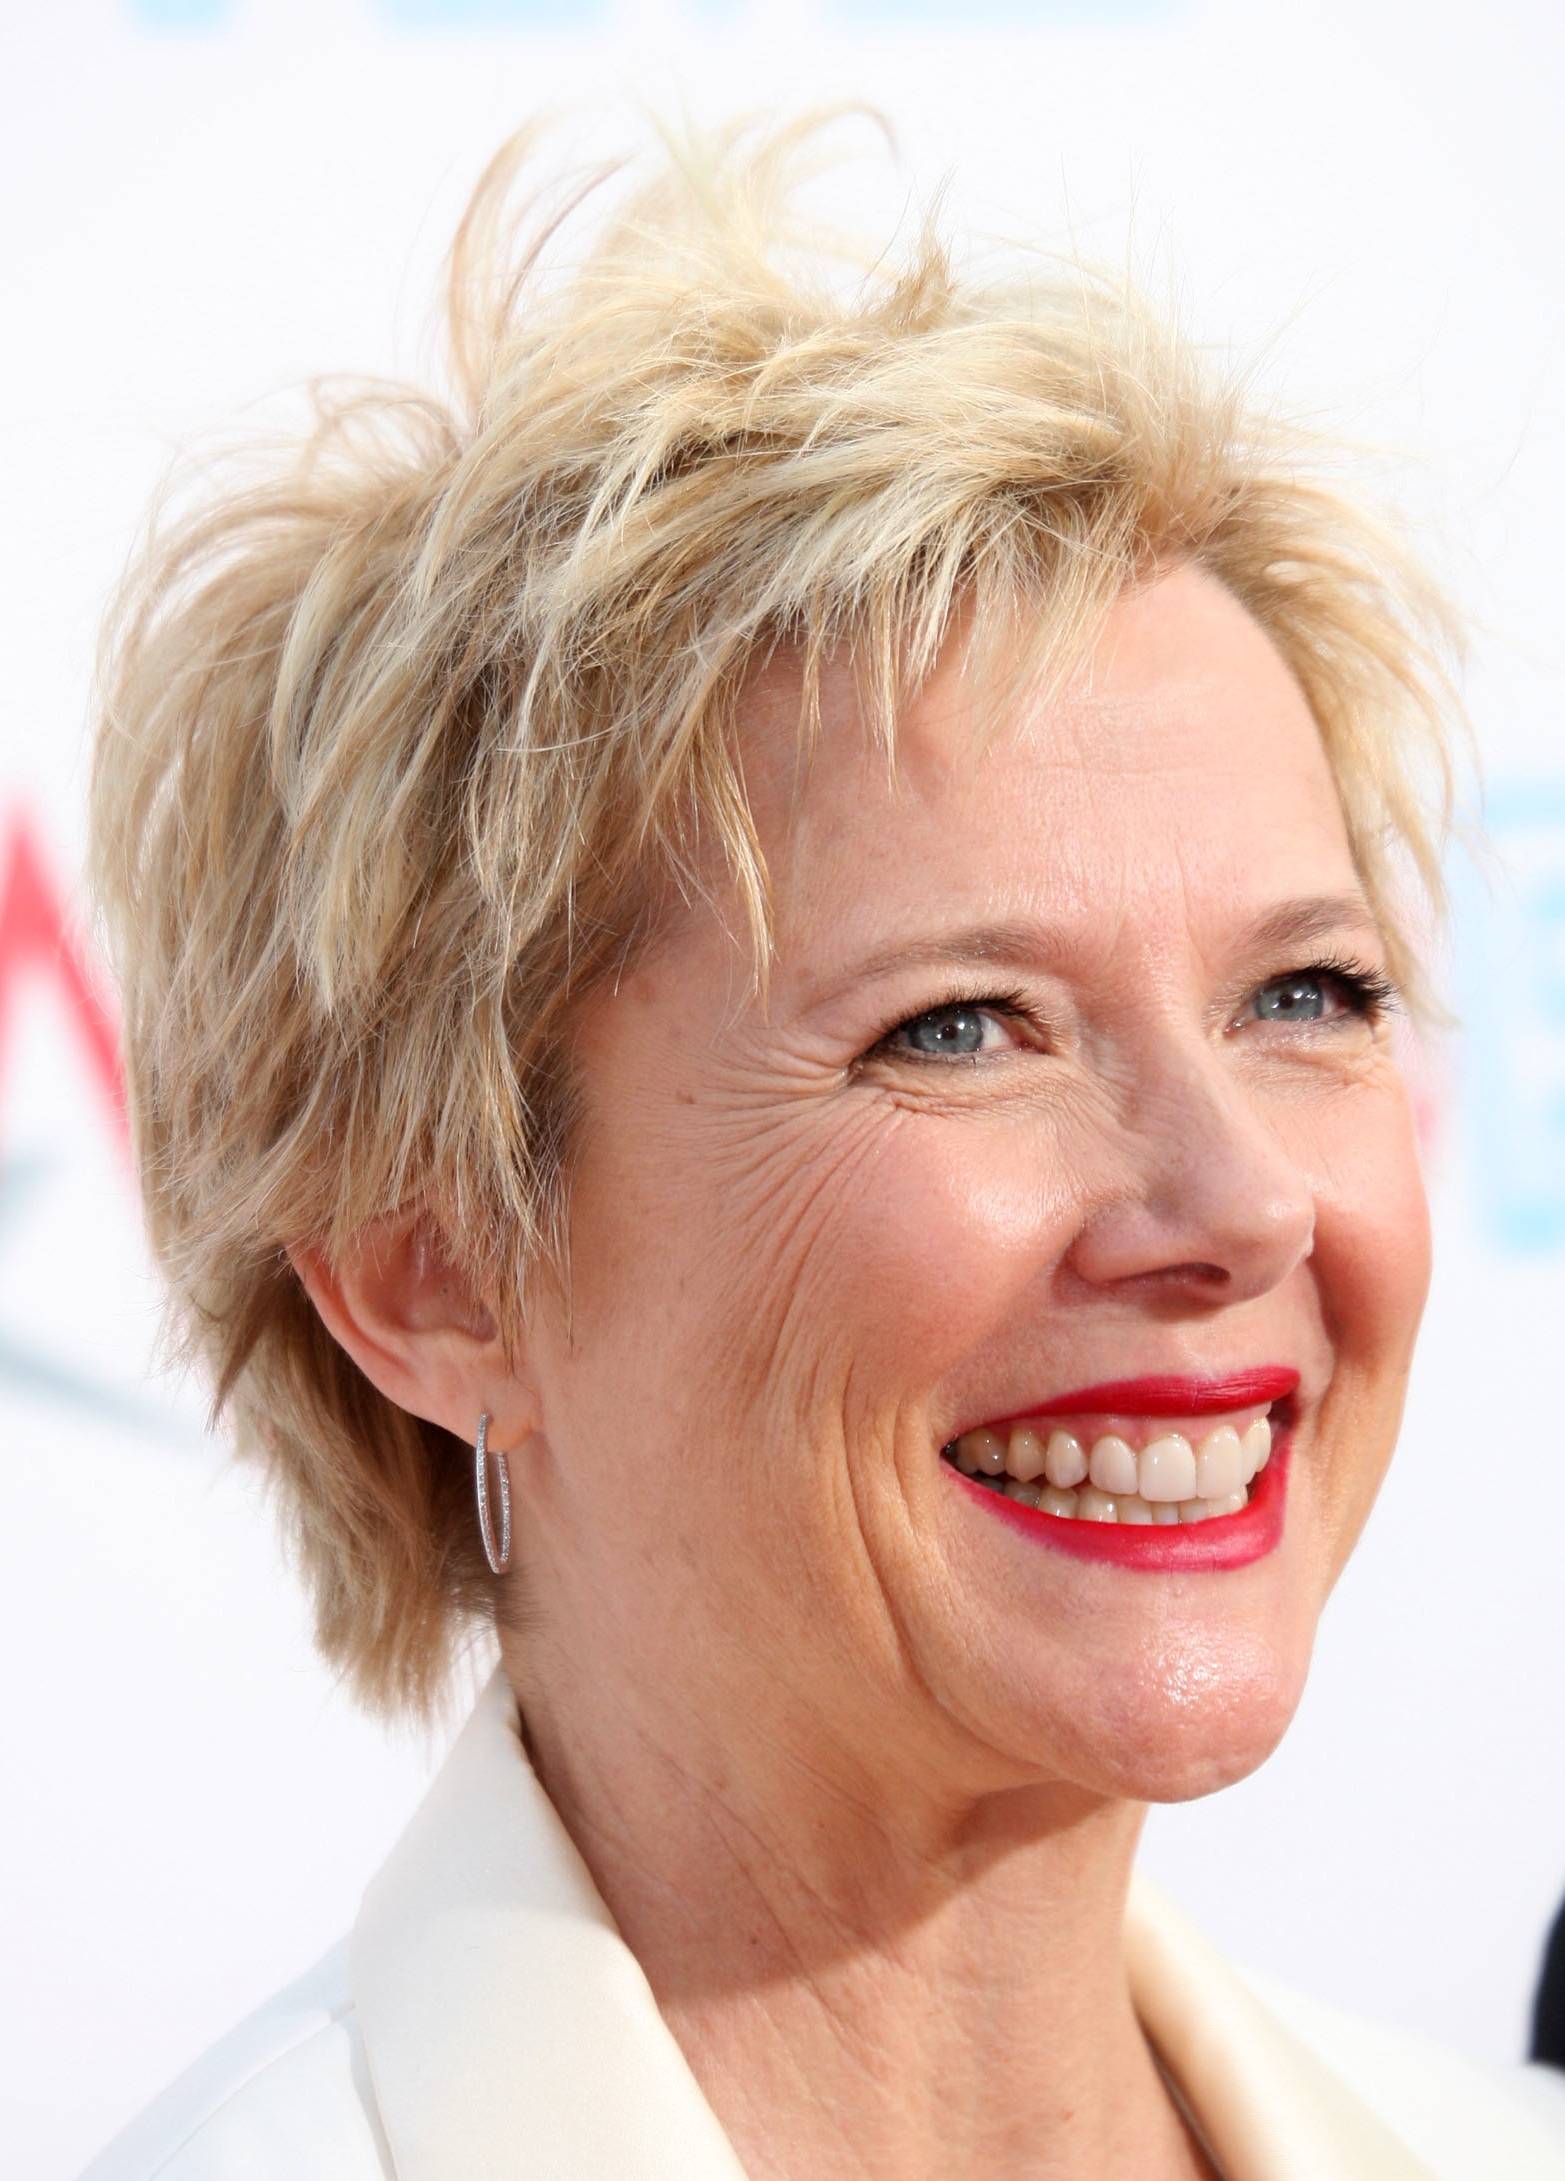 CULVER CITY, CA - JUNE 11:  Actress Annette Bening arrives at AFI Lifetime Achievement Award: A Tribute to Michael Douglas held at Sony Pictures Studios on June 11, 2009 in Culver City, California.  (Photo by Frederick M. Brown/Getty Images)